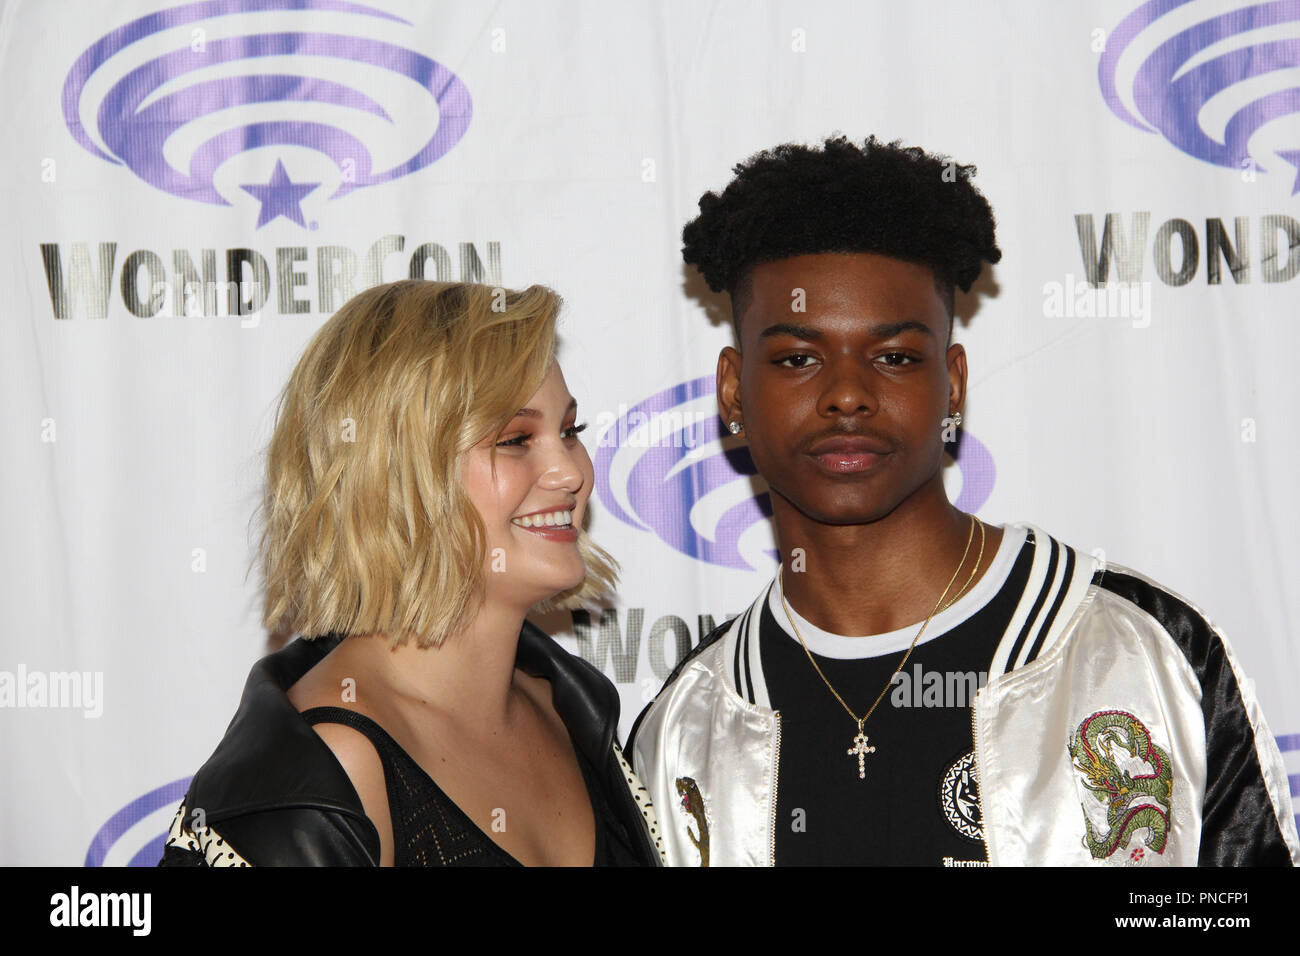 Olivia Holt and Aubrey Joseph promoting Marvel's Cloak & Dagger at WonderCon Anaheim 2018. Held at the Anaheim Convention Center in Anaheim, CA. March 23 2018. Photo by: Richard Chavez / PictureLux Stock Photo